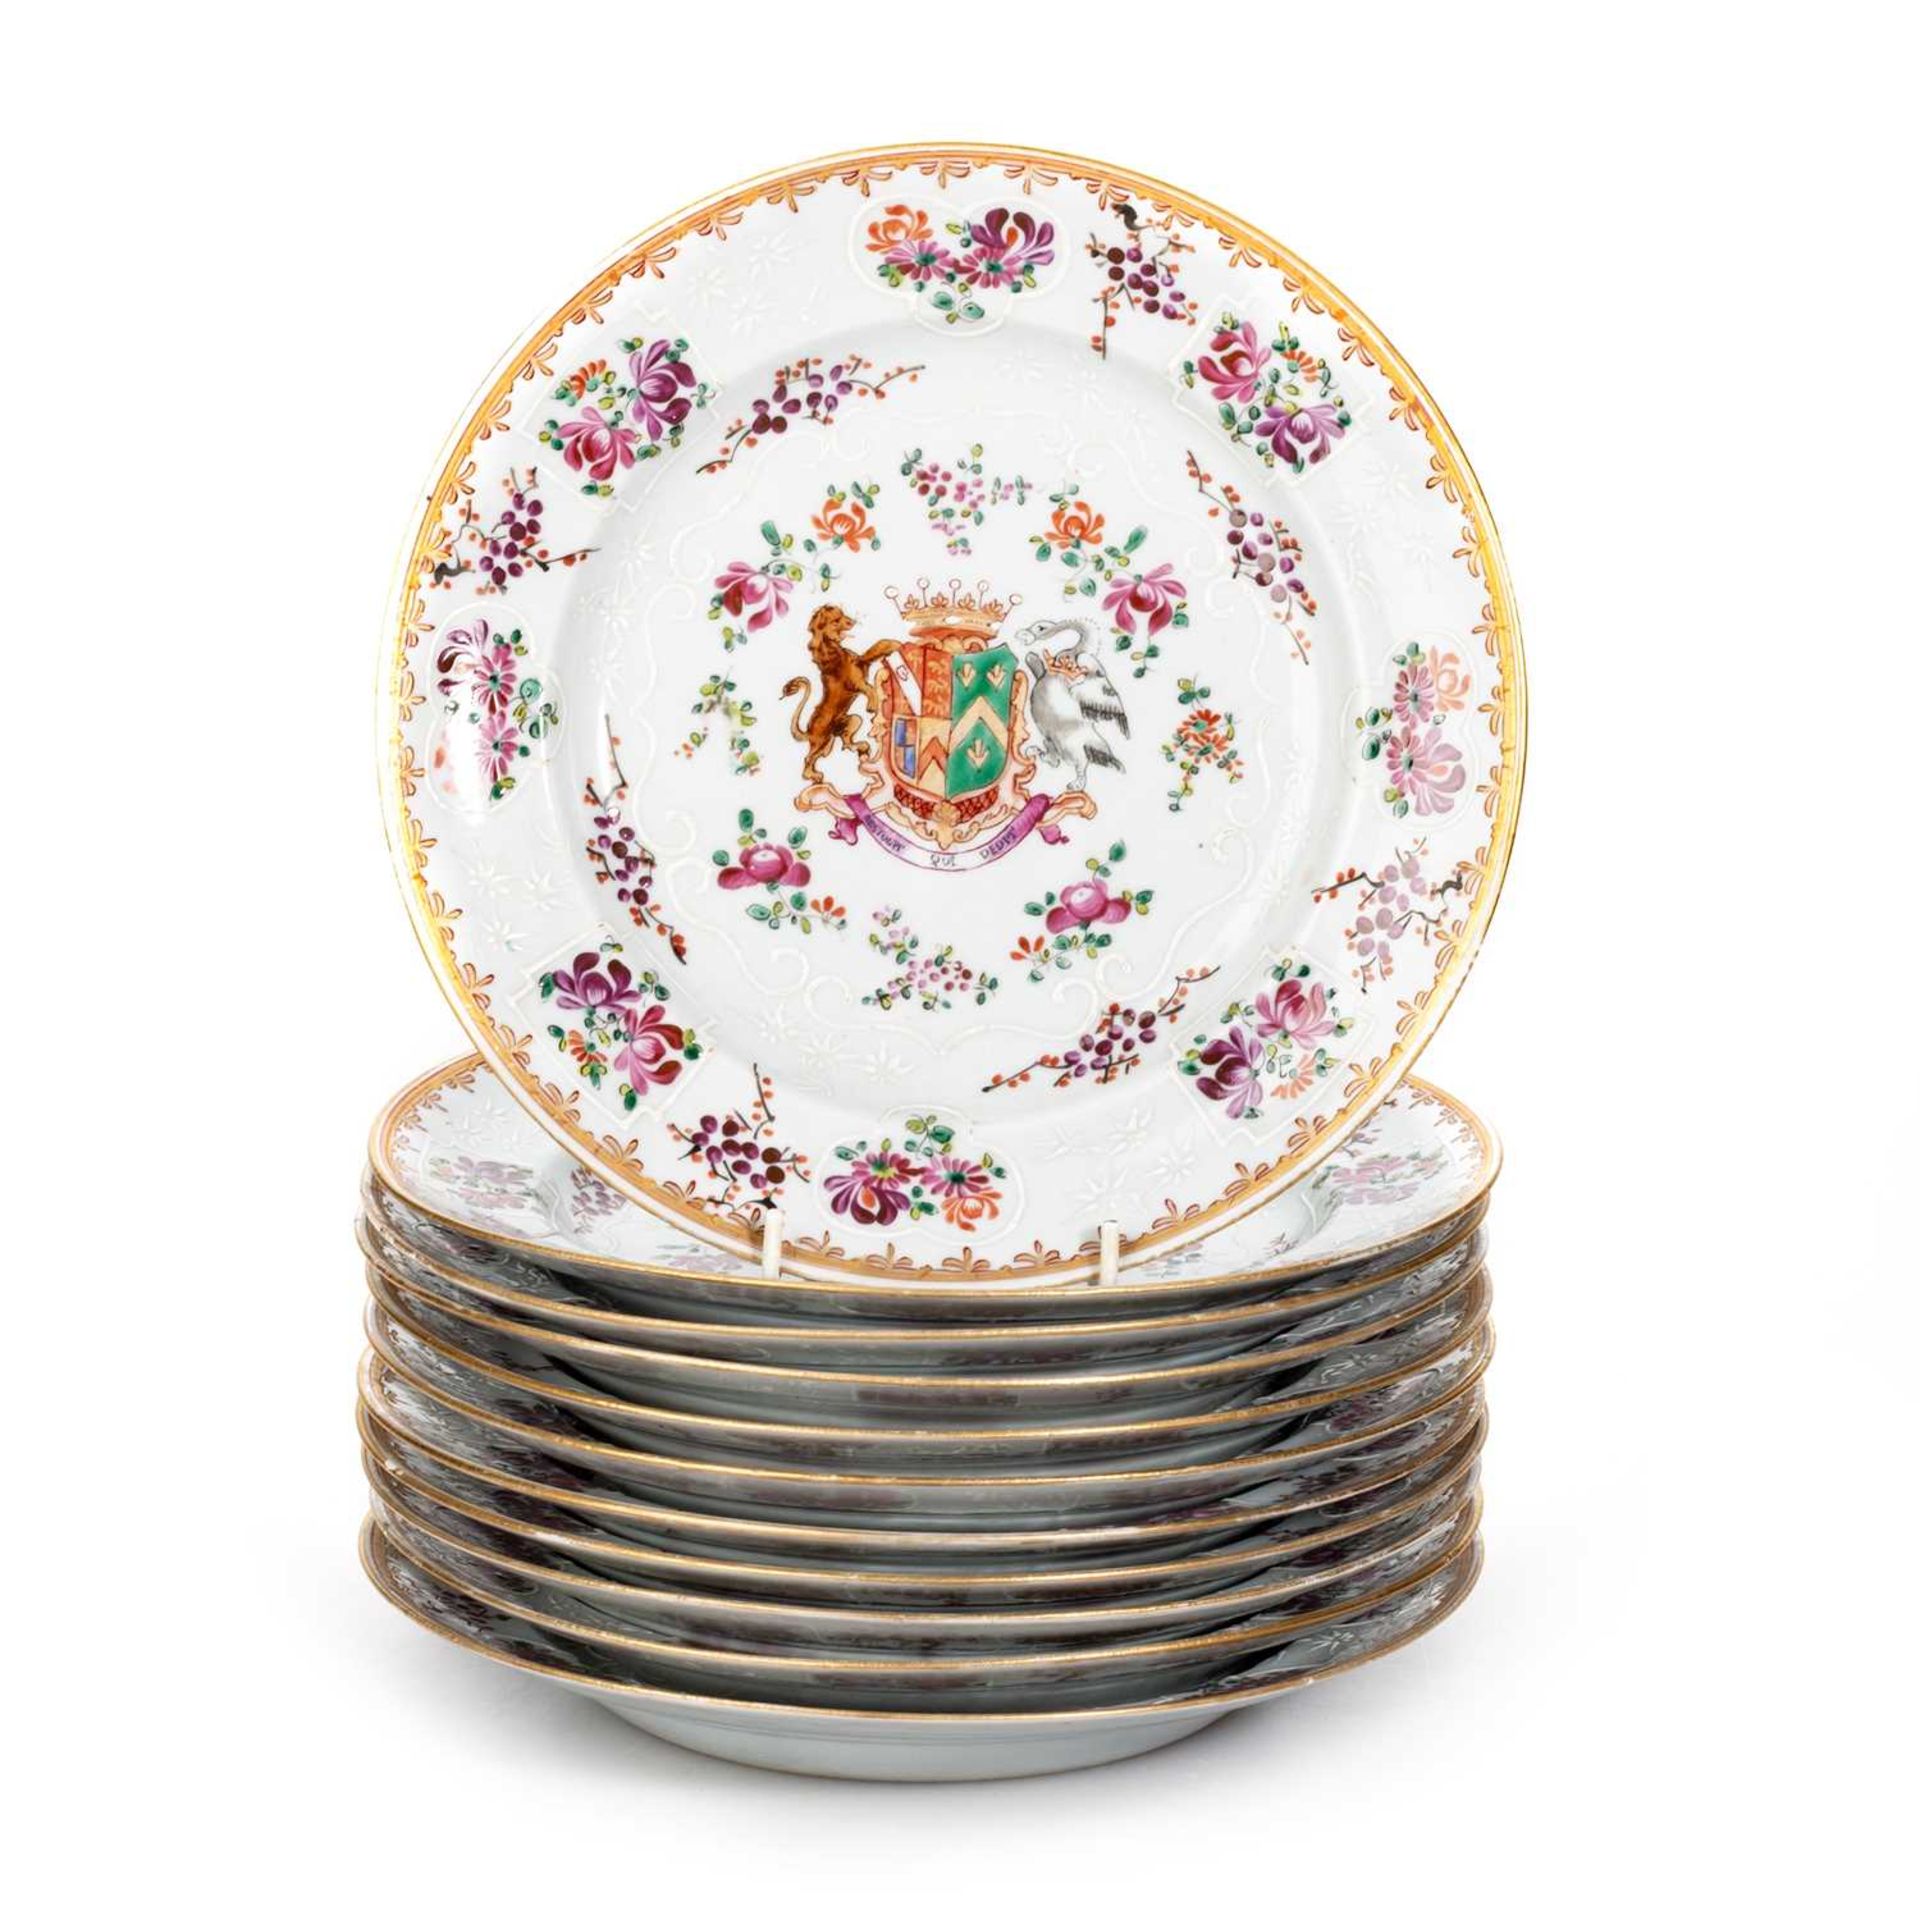 A SAMSON PORCELAIN DESSERT SERVICE IN CHINESE EXPORT ARMORIAL STYLE - Image 2 of 6